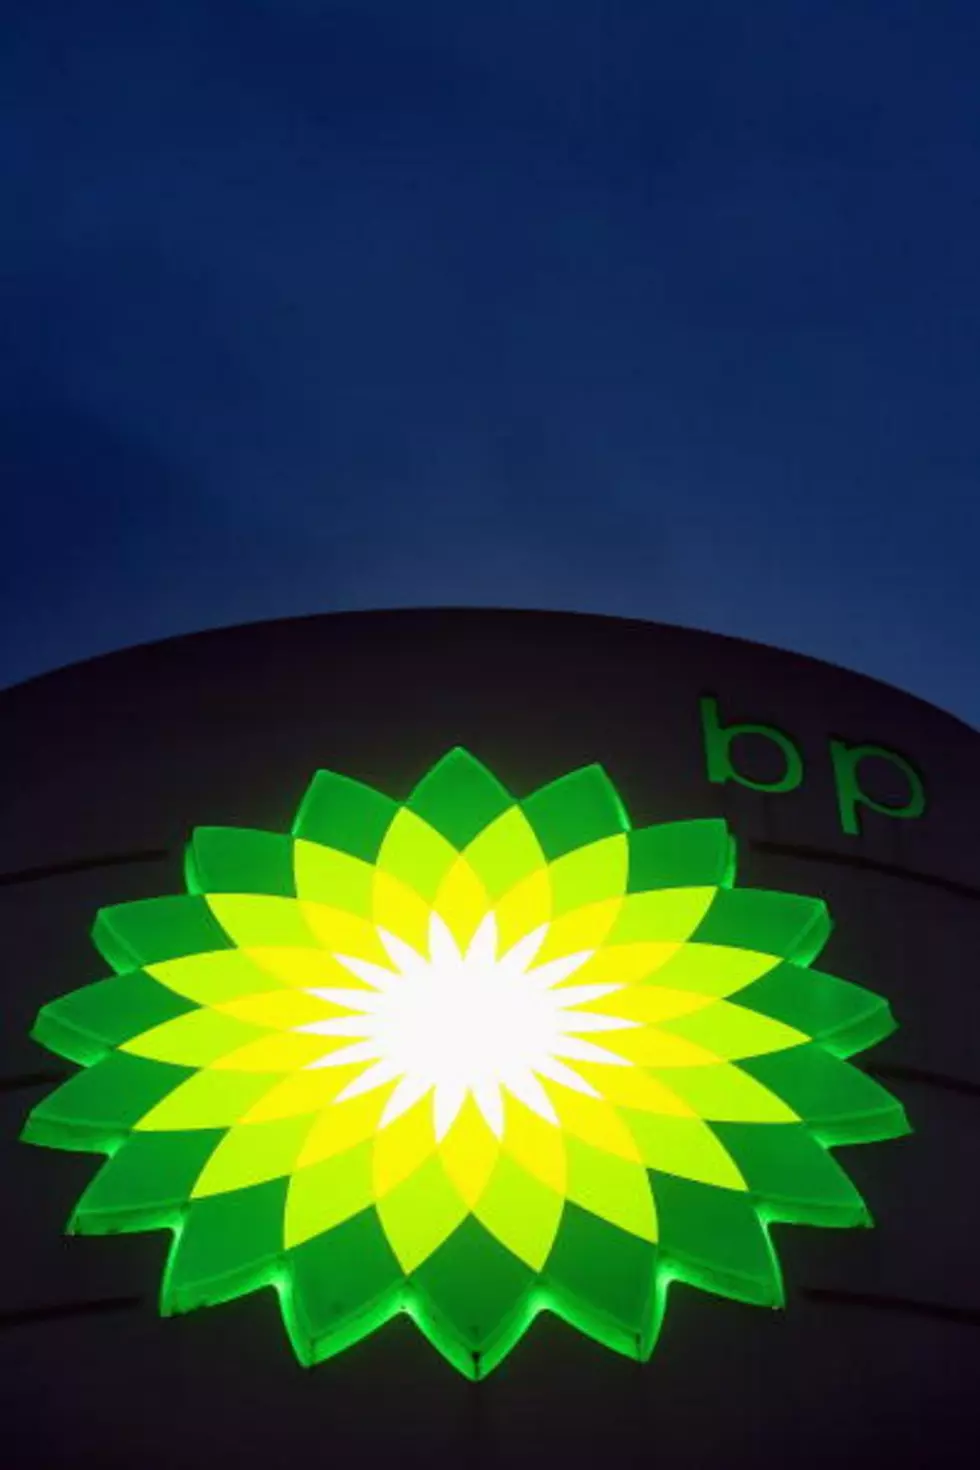 BP To Make Advance Payment